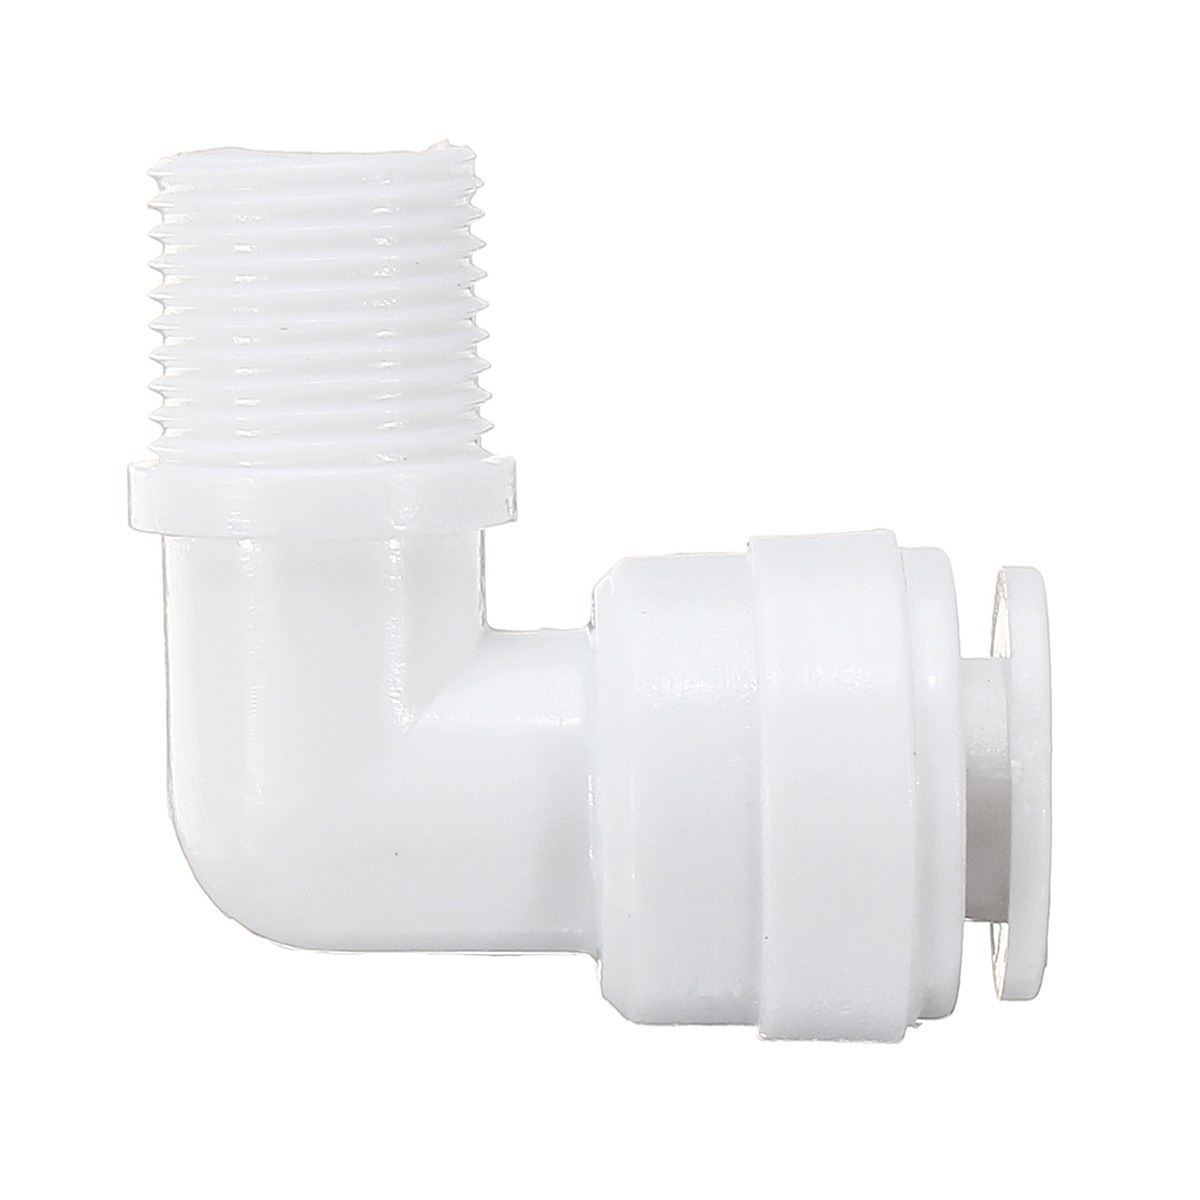 

1/4 1/8 Inch RO Grade Water Tube Fitting Quick Push In to Connection Pipes Fittings for Water Filter